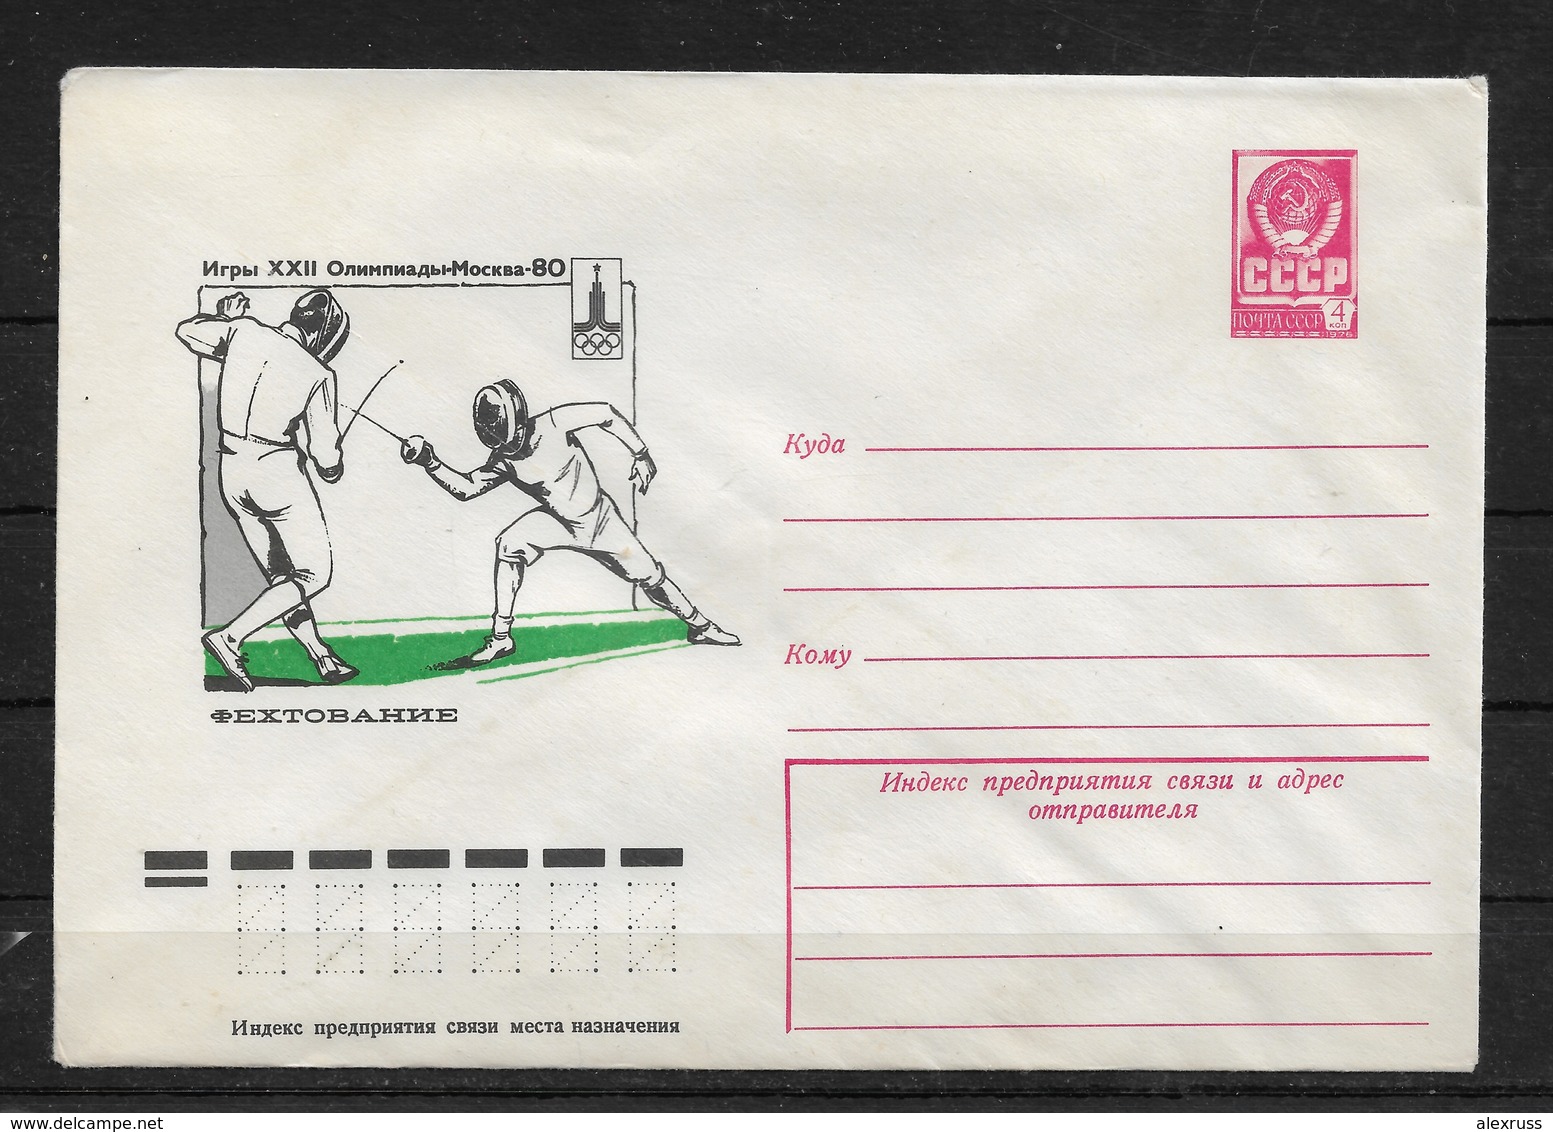 Russia/USSR 1980, Cachet Cover, Moscow'80 Olympics, Fencing,VF Unused ! RARE (NR50) - Esgrima